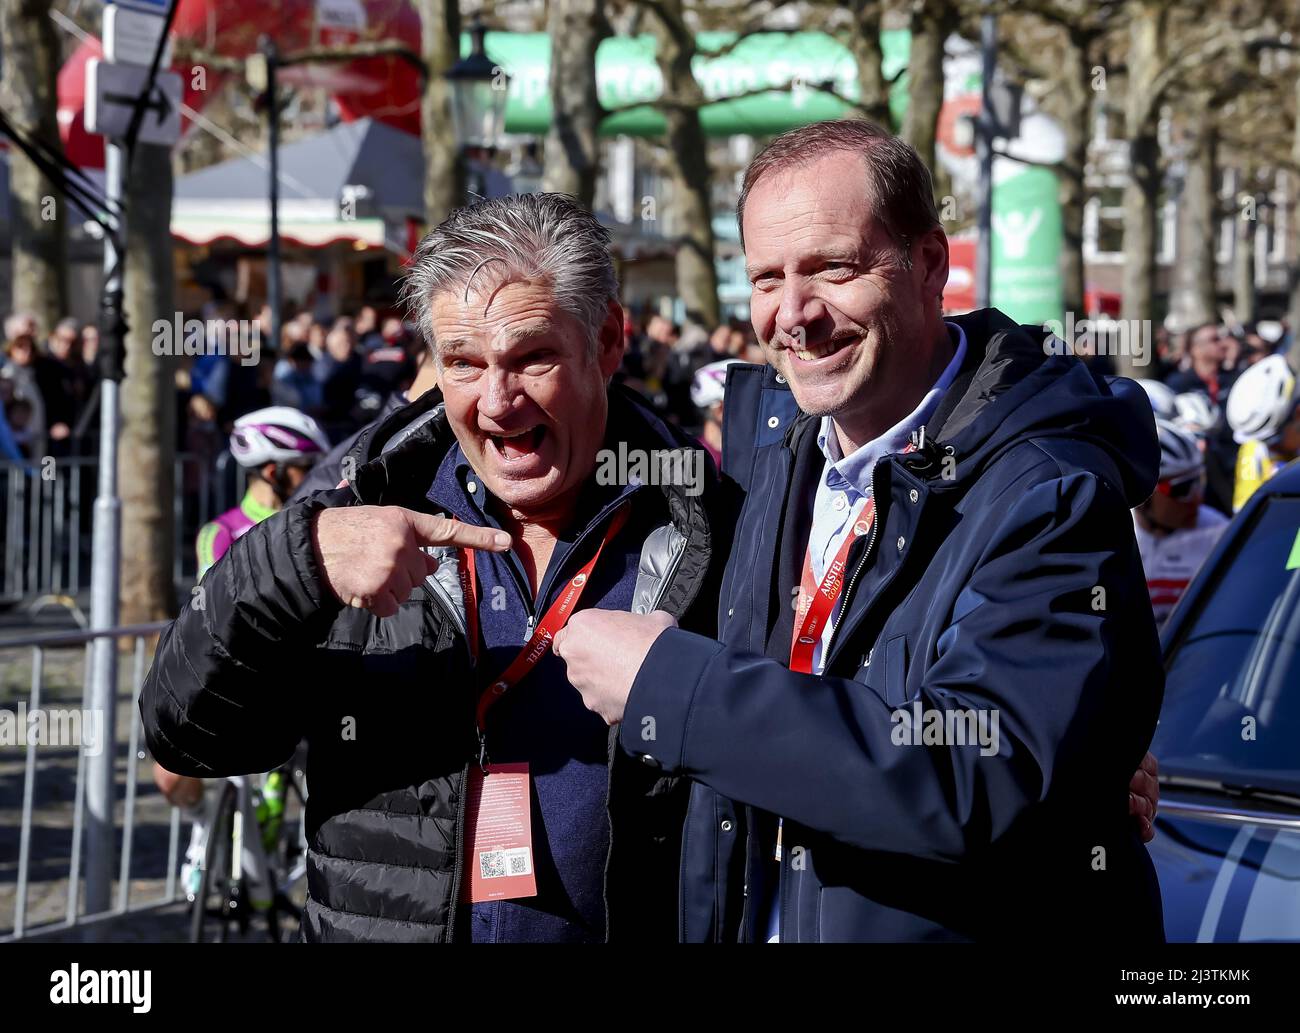 Rotterdam, Netherlands. 10th Apr 2022.  MAASTRICHT - Race director Leo van Vliet with Tour de France director Christian Prudhomme prior to the start of the 56th Amstel Gold Race 2022 on April 10, 2022 in Maastricht, Netherlands. ANP VINCENT JANNINK Credit: ANP/Alamy Live News Credit: ANP/Alamy Live News Stock Photo